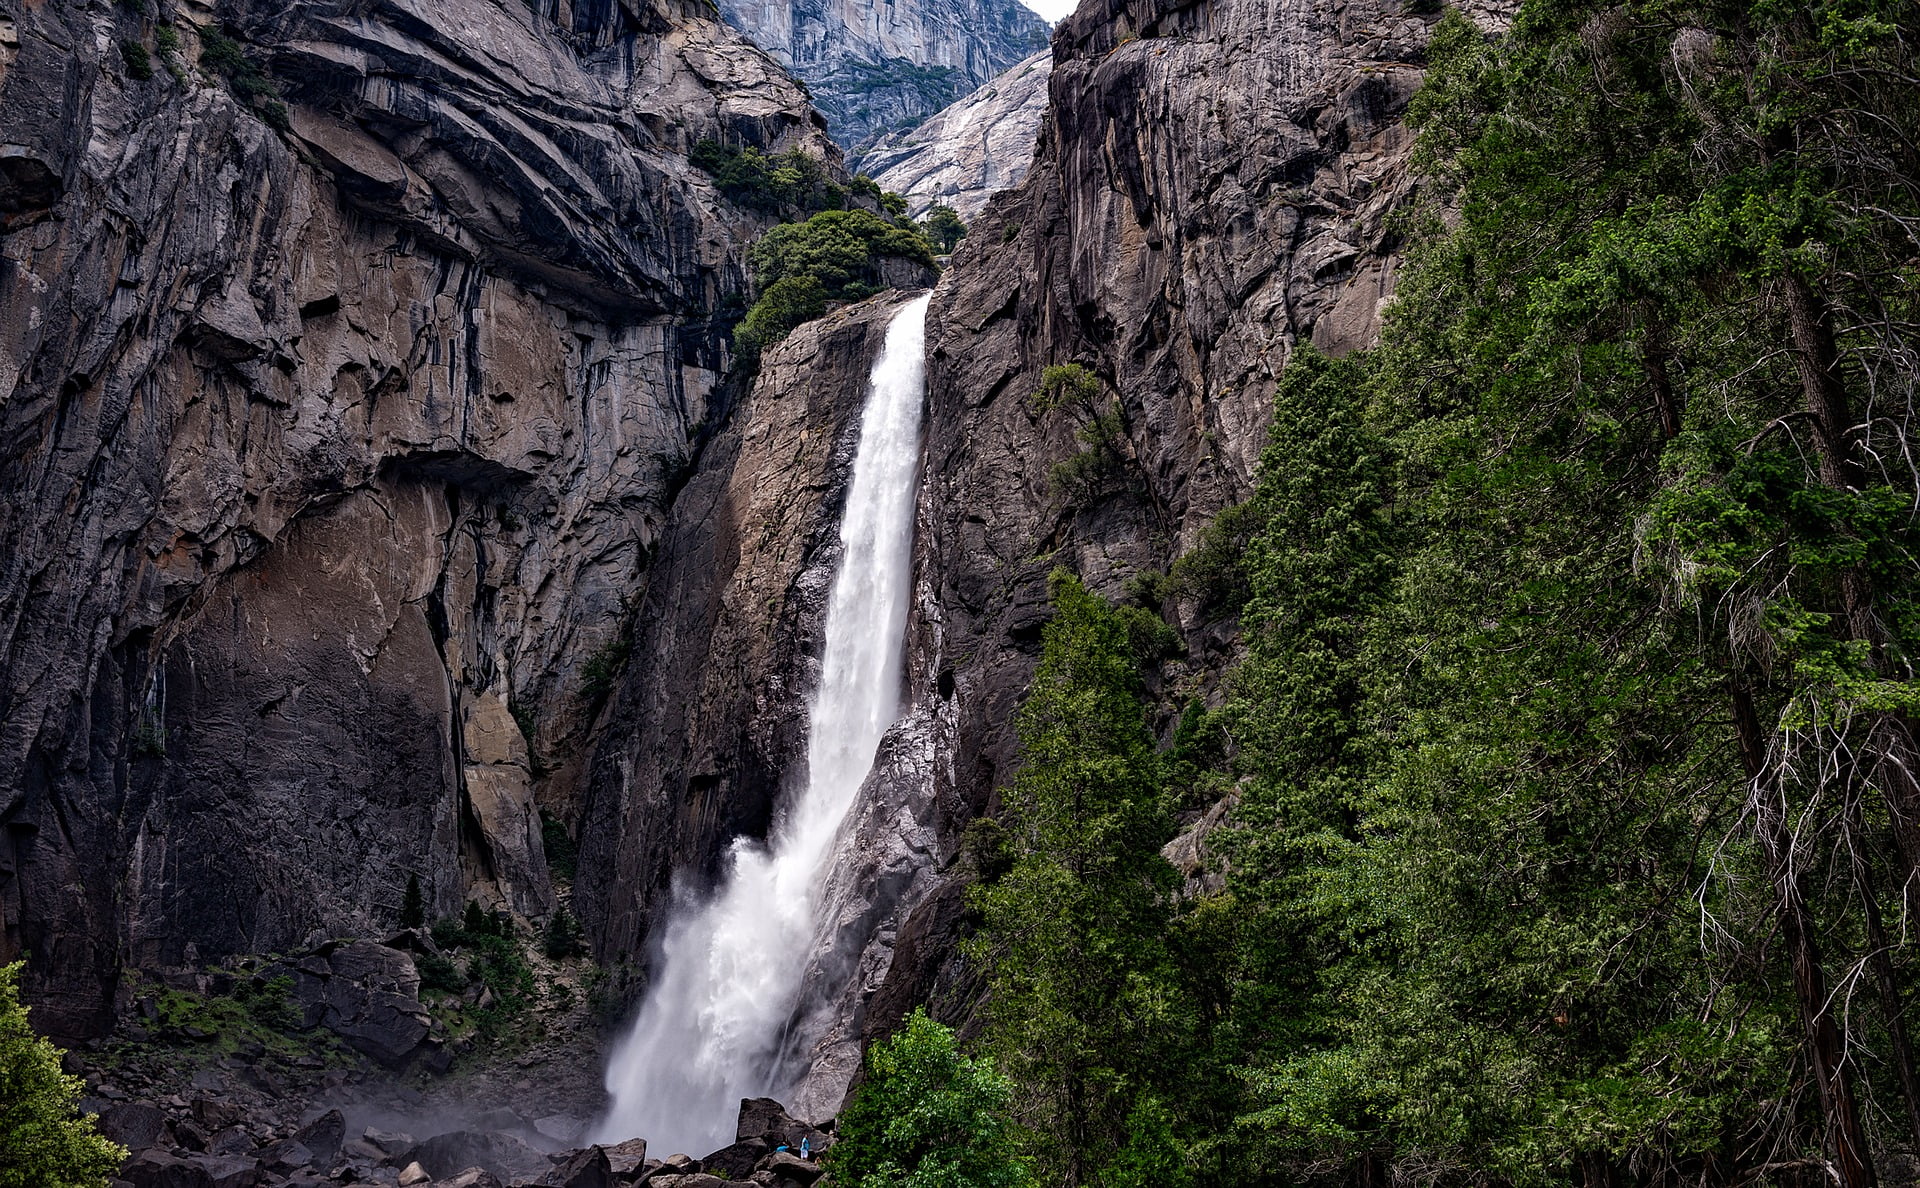 How To Get To Yosemite National Park?